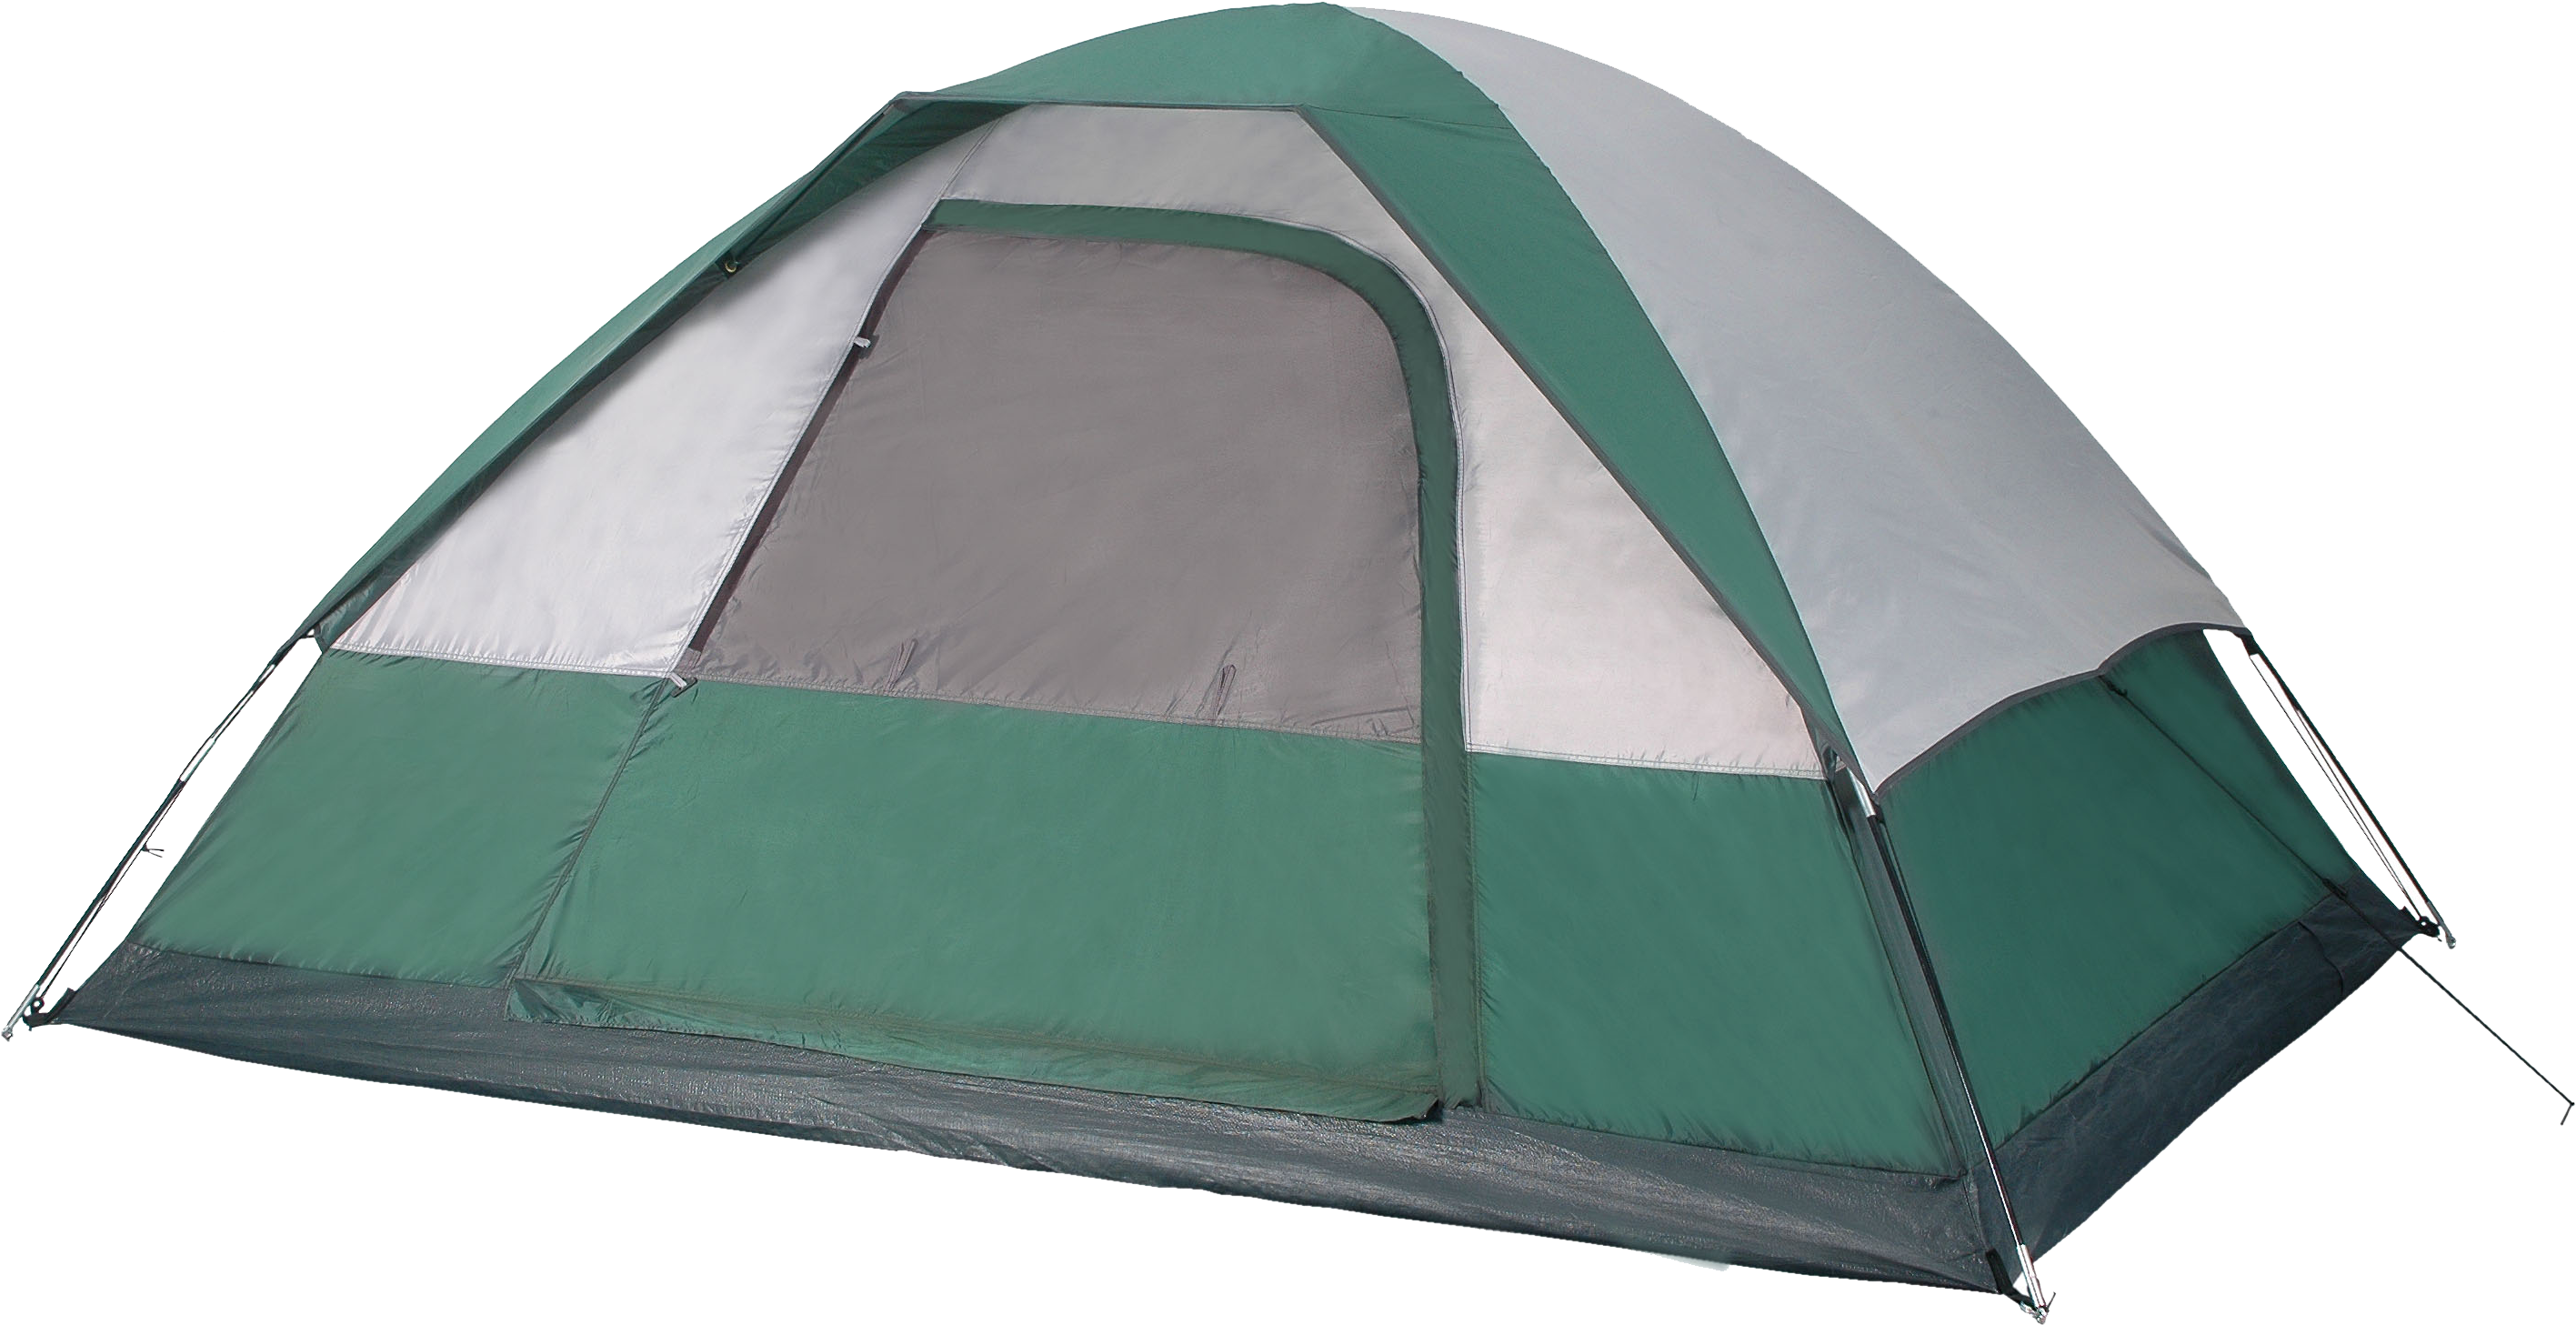 A Green And White Tent